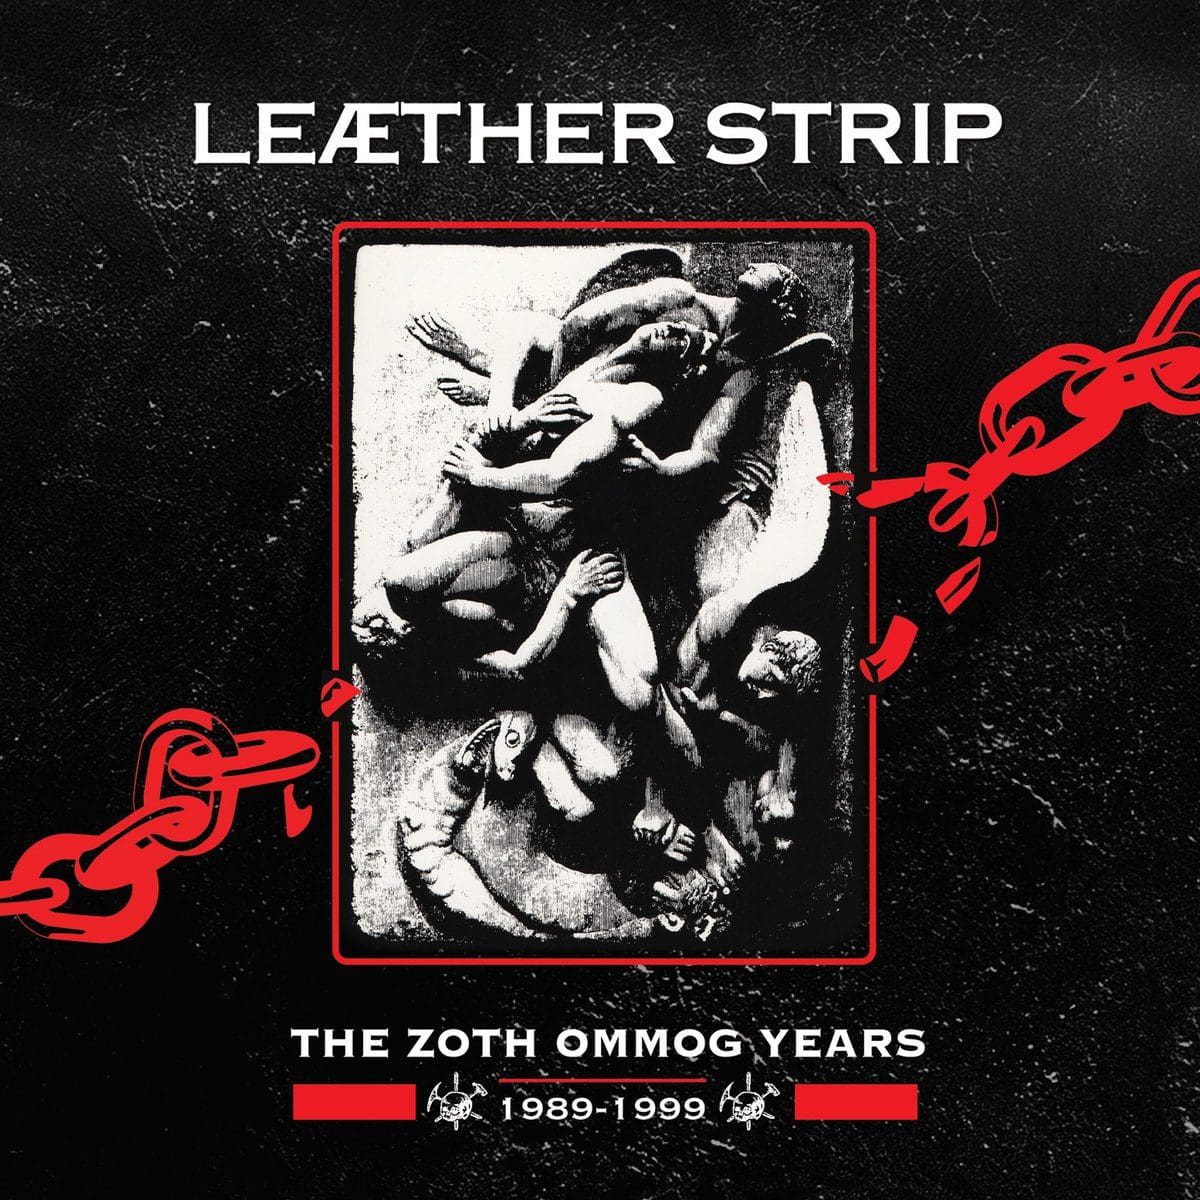 Cleopatra to release 'Leaether Strip: The Zoth Ommog Years 1989-1999'